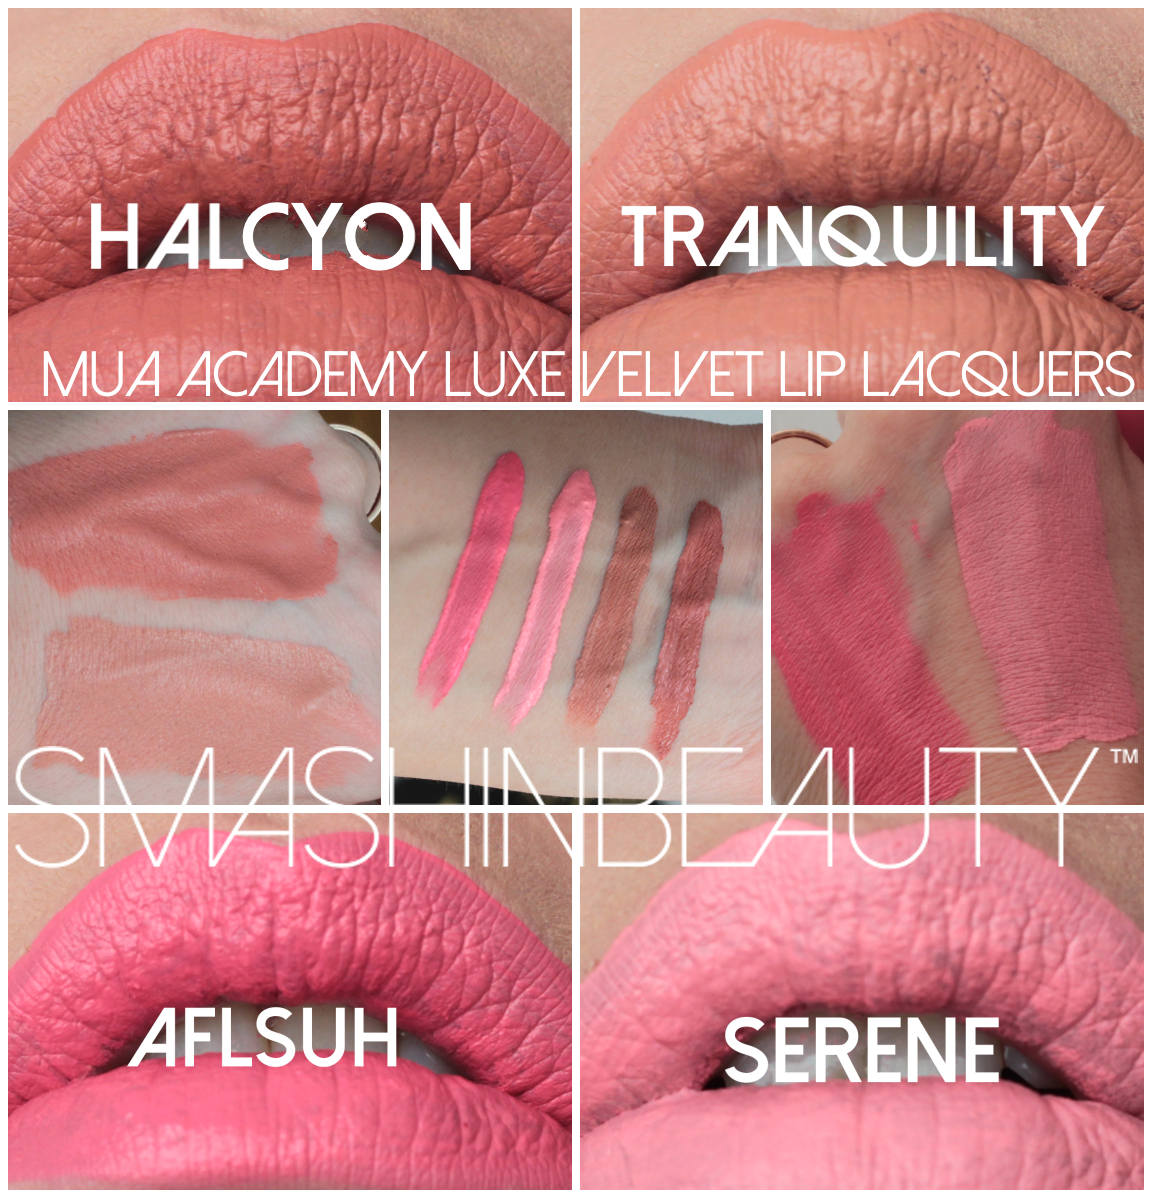 intelligentie logboek Visa MUA academy luxe velvet lip lacquers in tranquility, halcyon, aflush and  serene swatches makeup review - SmashinBeauty